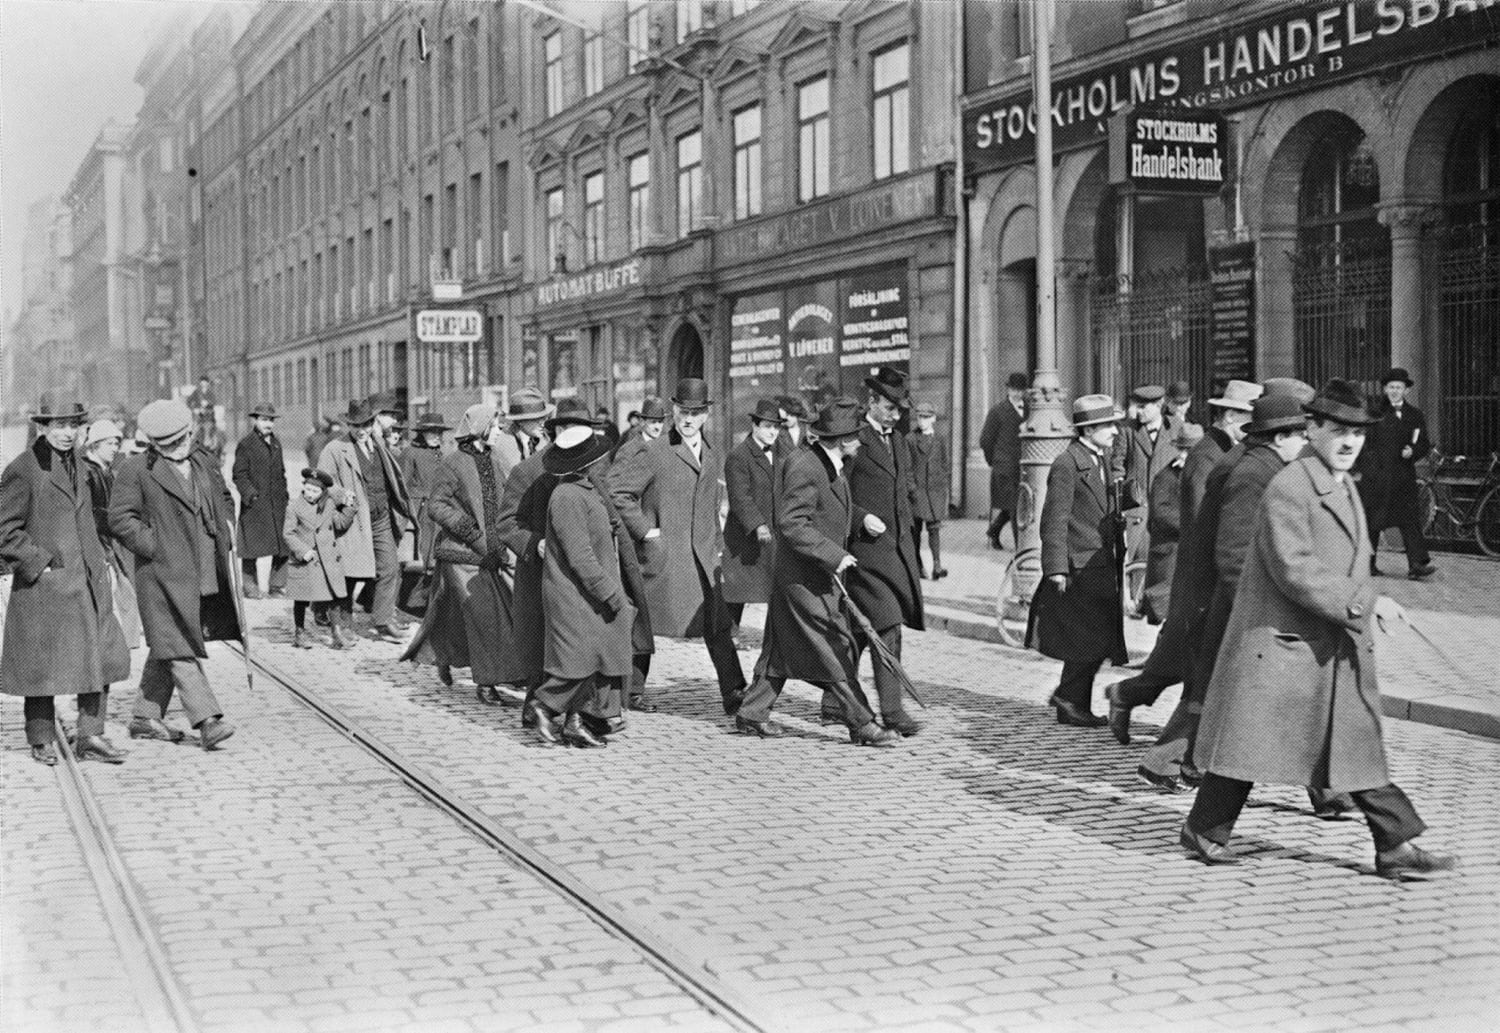 Lenin in Stockholm, Sweden, during his transit to Russia. April 13 1917.